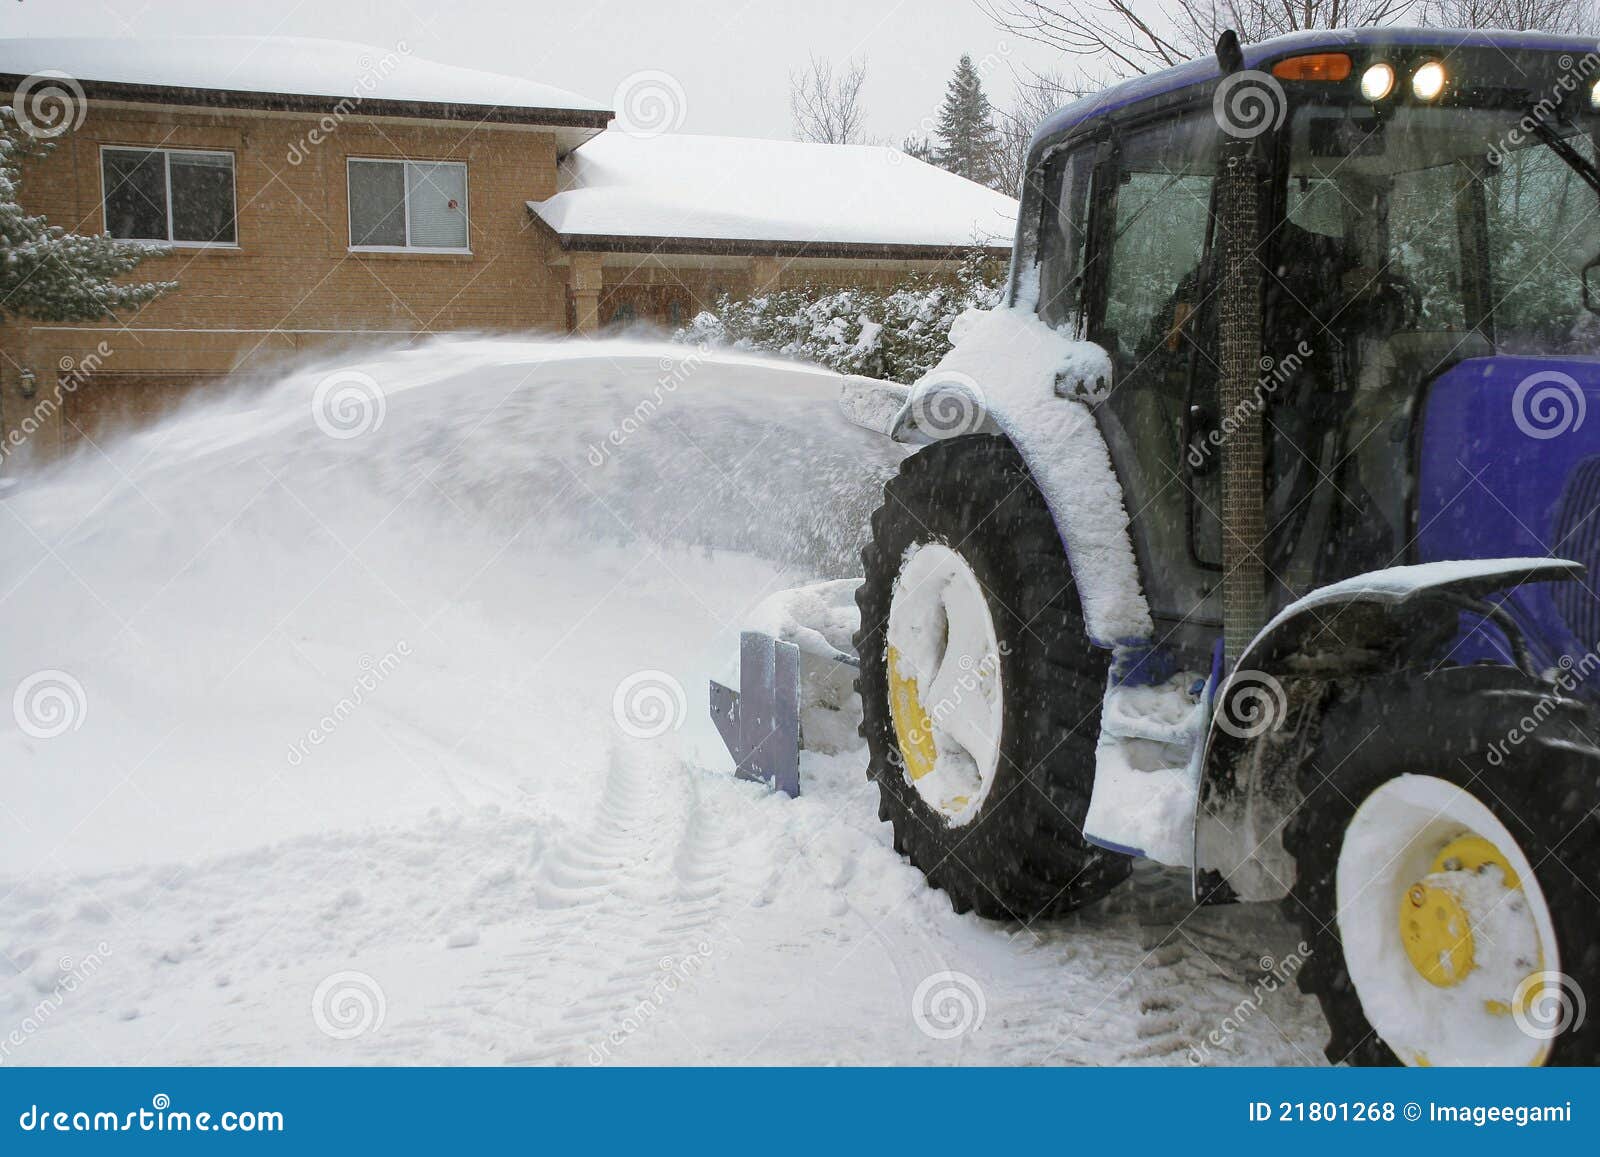 residential snow removal contractor